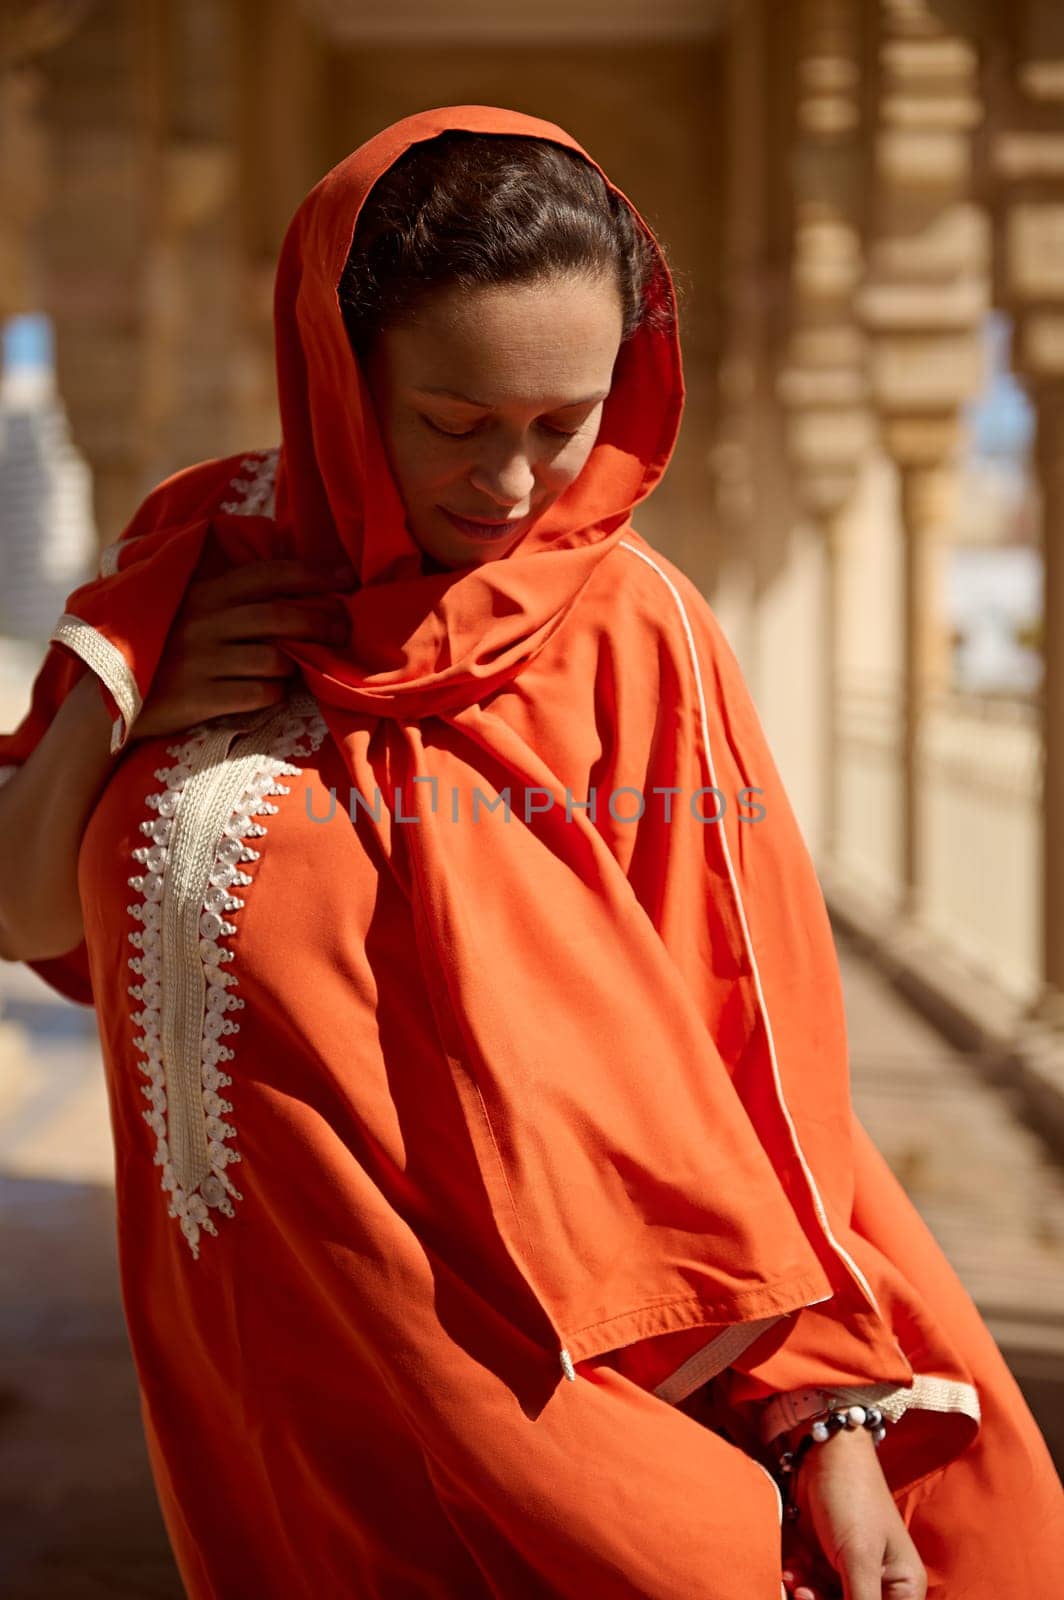 Authentic portrait of Middle Eastern pretty woman with head covered in hijab, dressed in traditional Moroccan Handora dress, posing against beige the mosque marble columns background. People. Religion